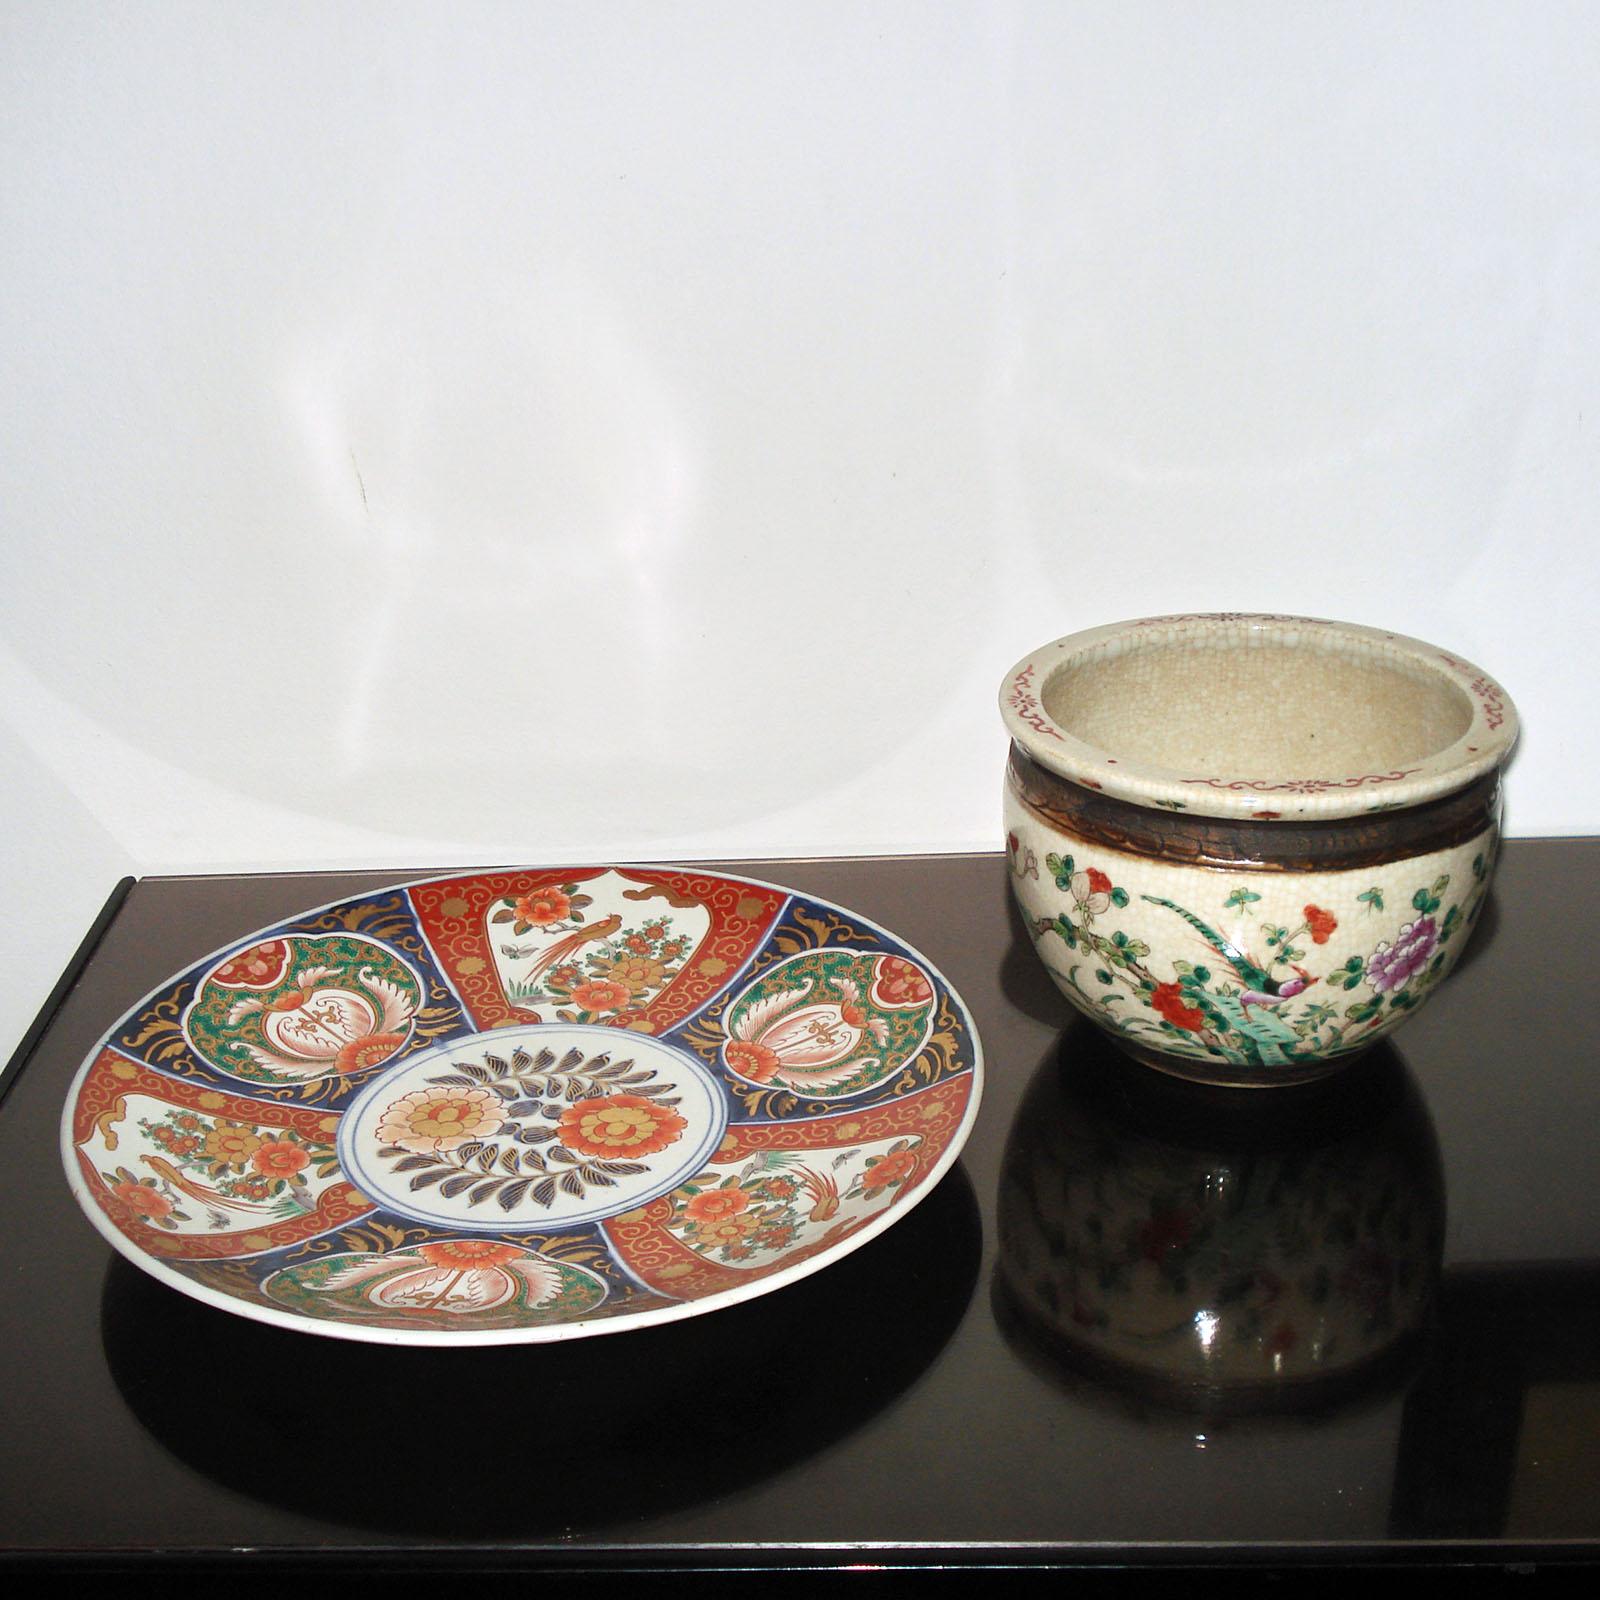 Circa 19th century Imari charger with scrolled stand. The charger plate features six various illustrations of flowers, birds, and butterflies framing a center medallion of flowers.
Measure: Diameter 37 cm.